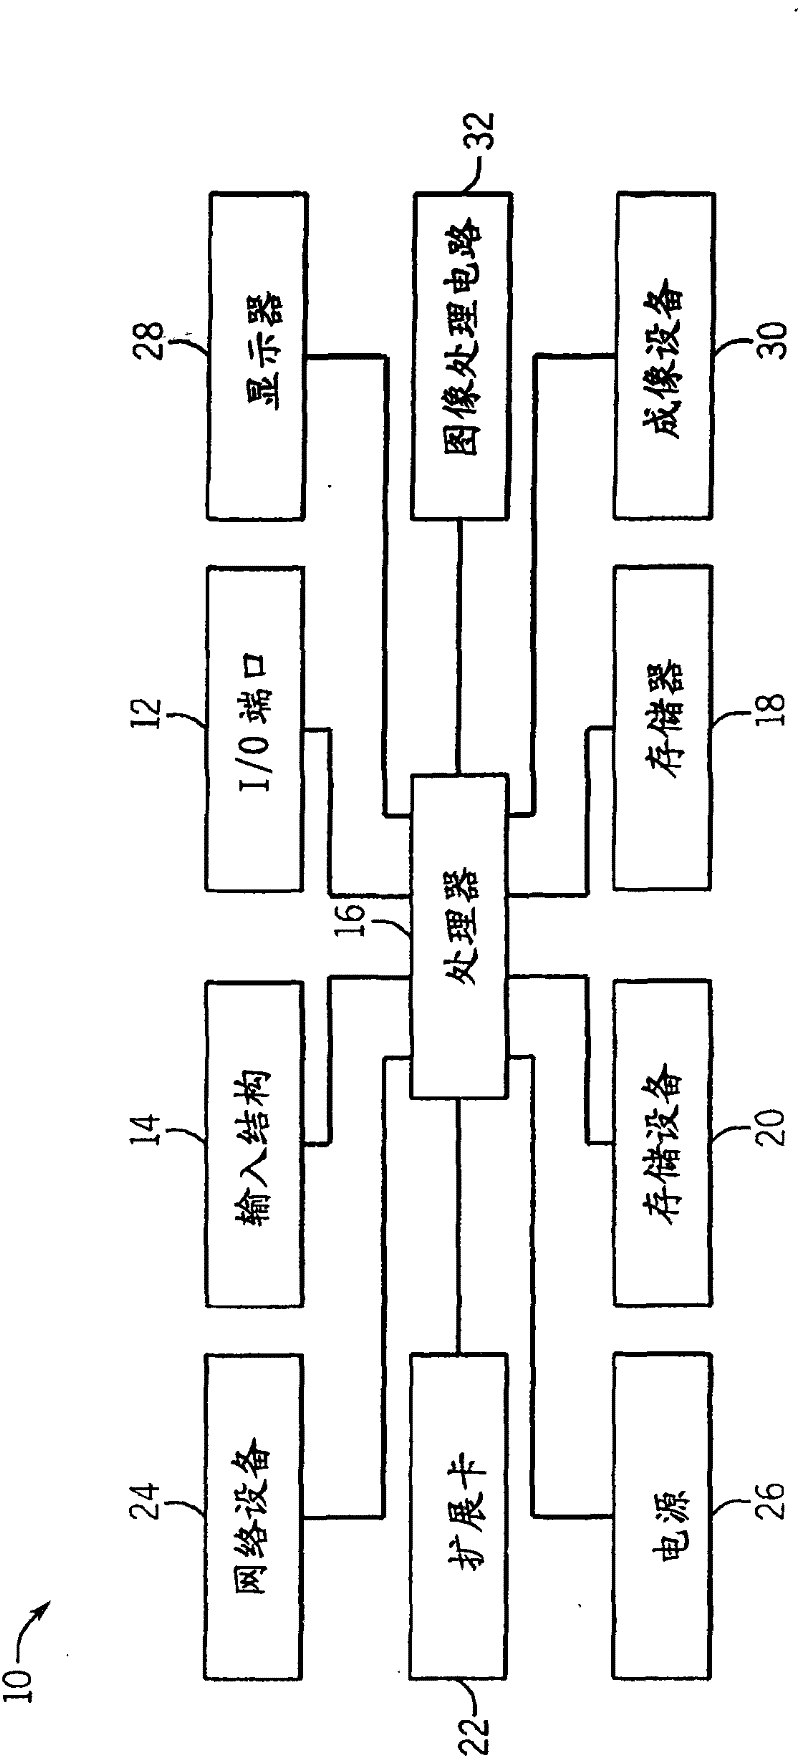 System and method for processing image data using an image signal processor